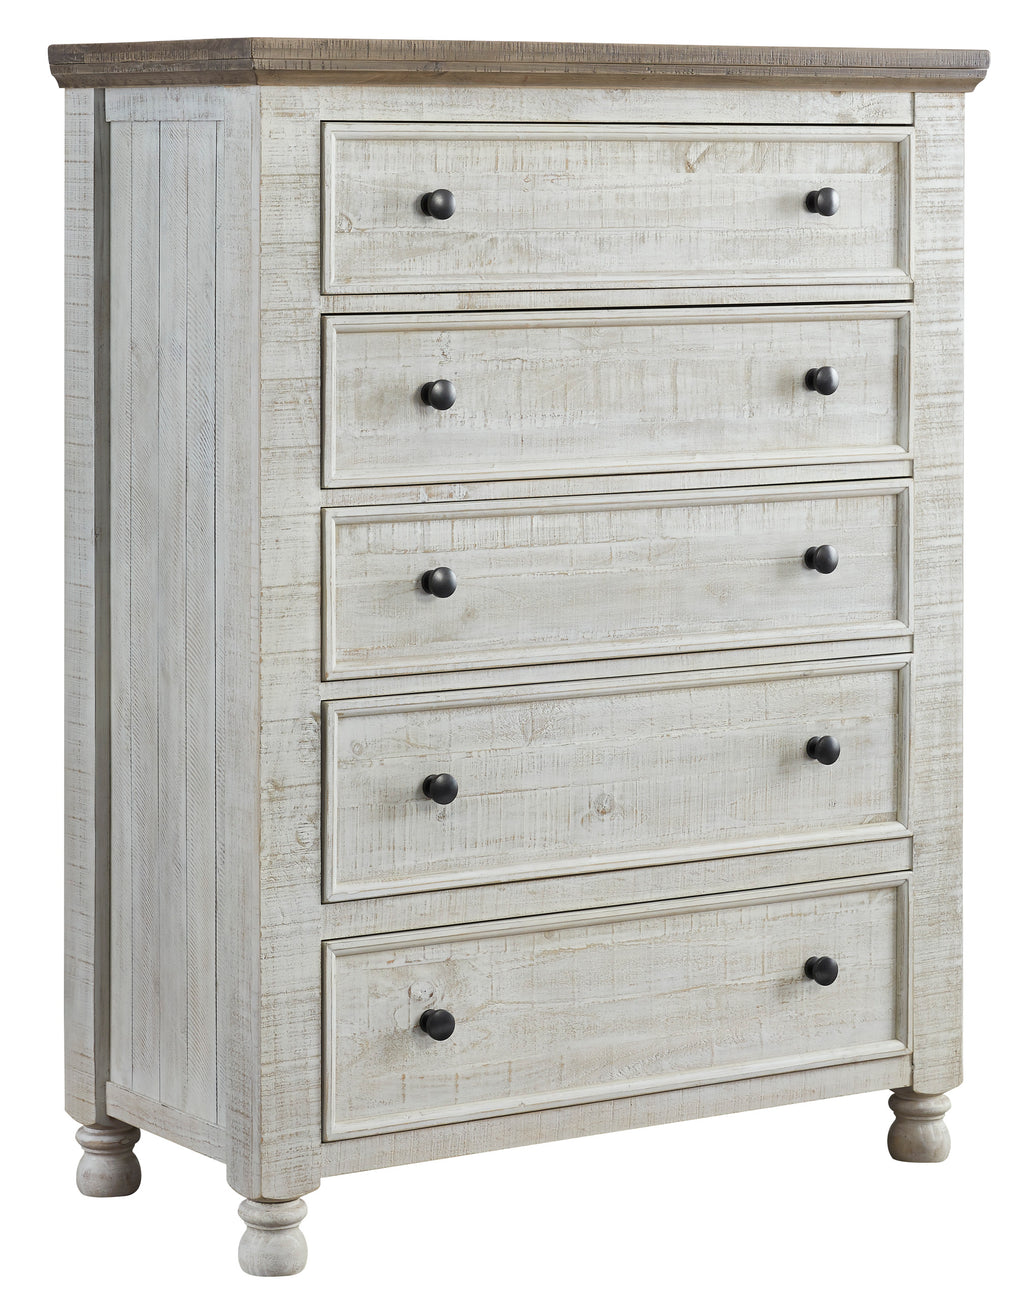 Havalance Chest of Drawers